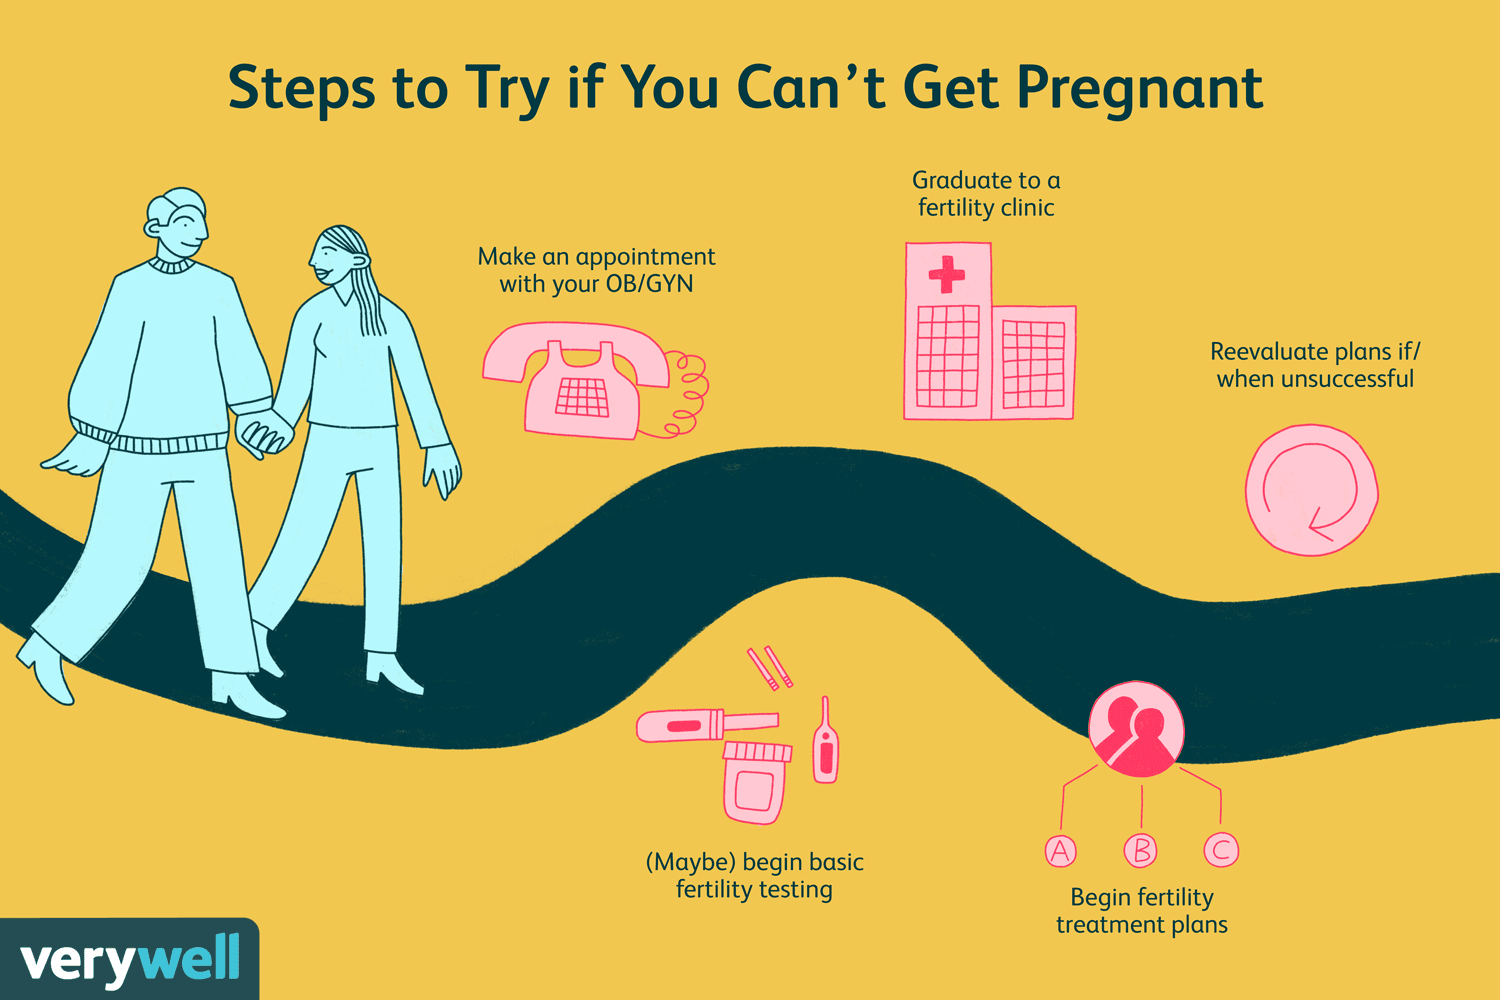 What to Do if Pregnant by Mistake?